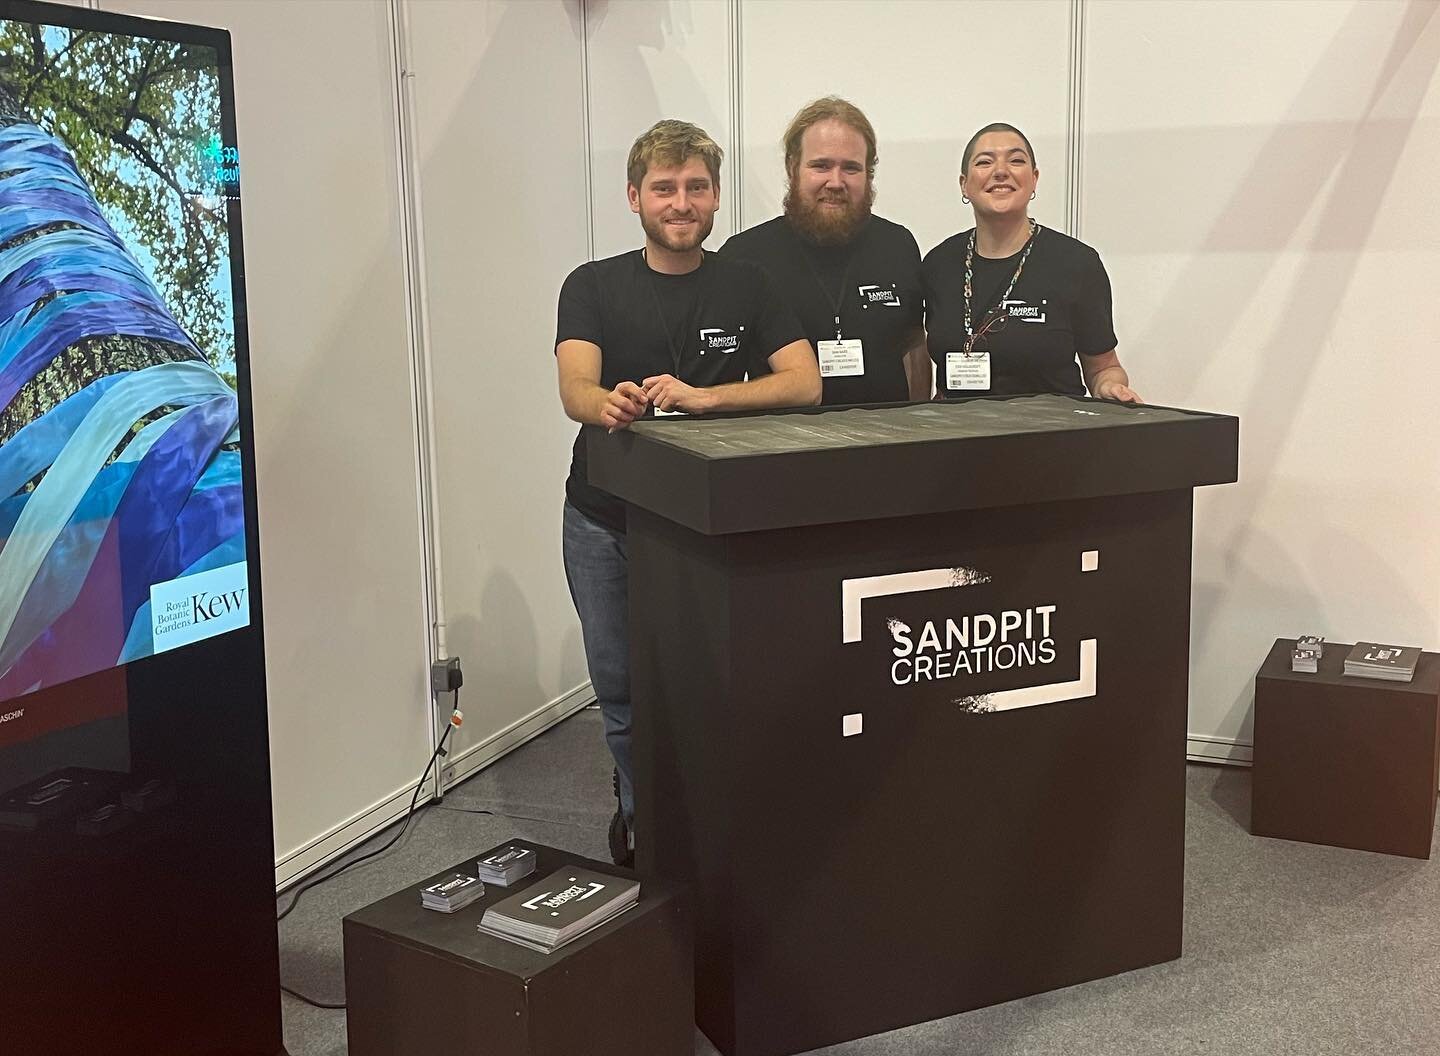 Hello from the @familyattraction_expo! Had a great day meeting lots of new faces and catching up with some more familiar ones, and meeting lots of dinosaurs&hellip; looking forward to day two tomorrow!

#familyattractionexpo #expo #sandpitcreations #